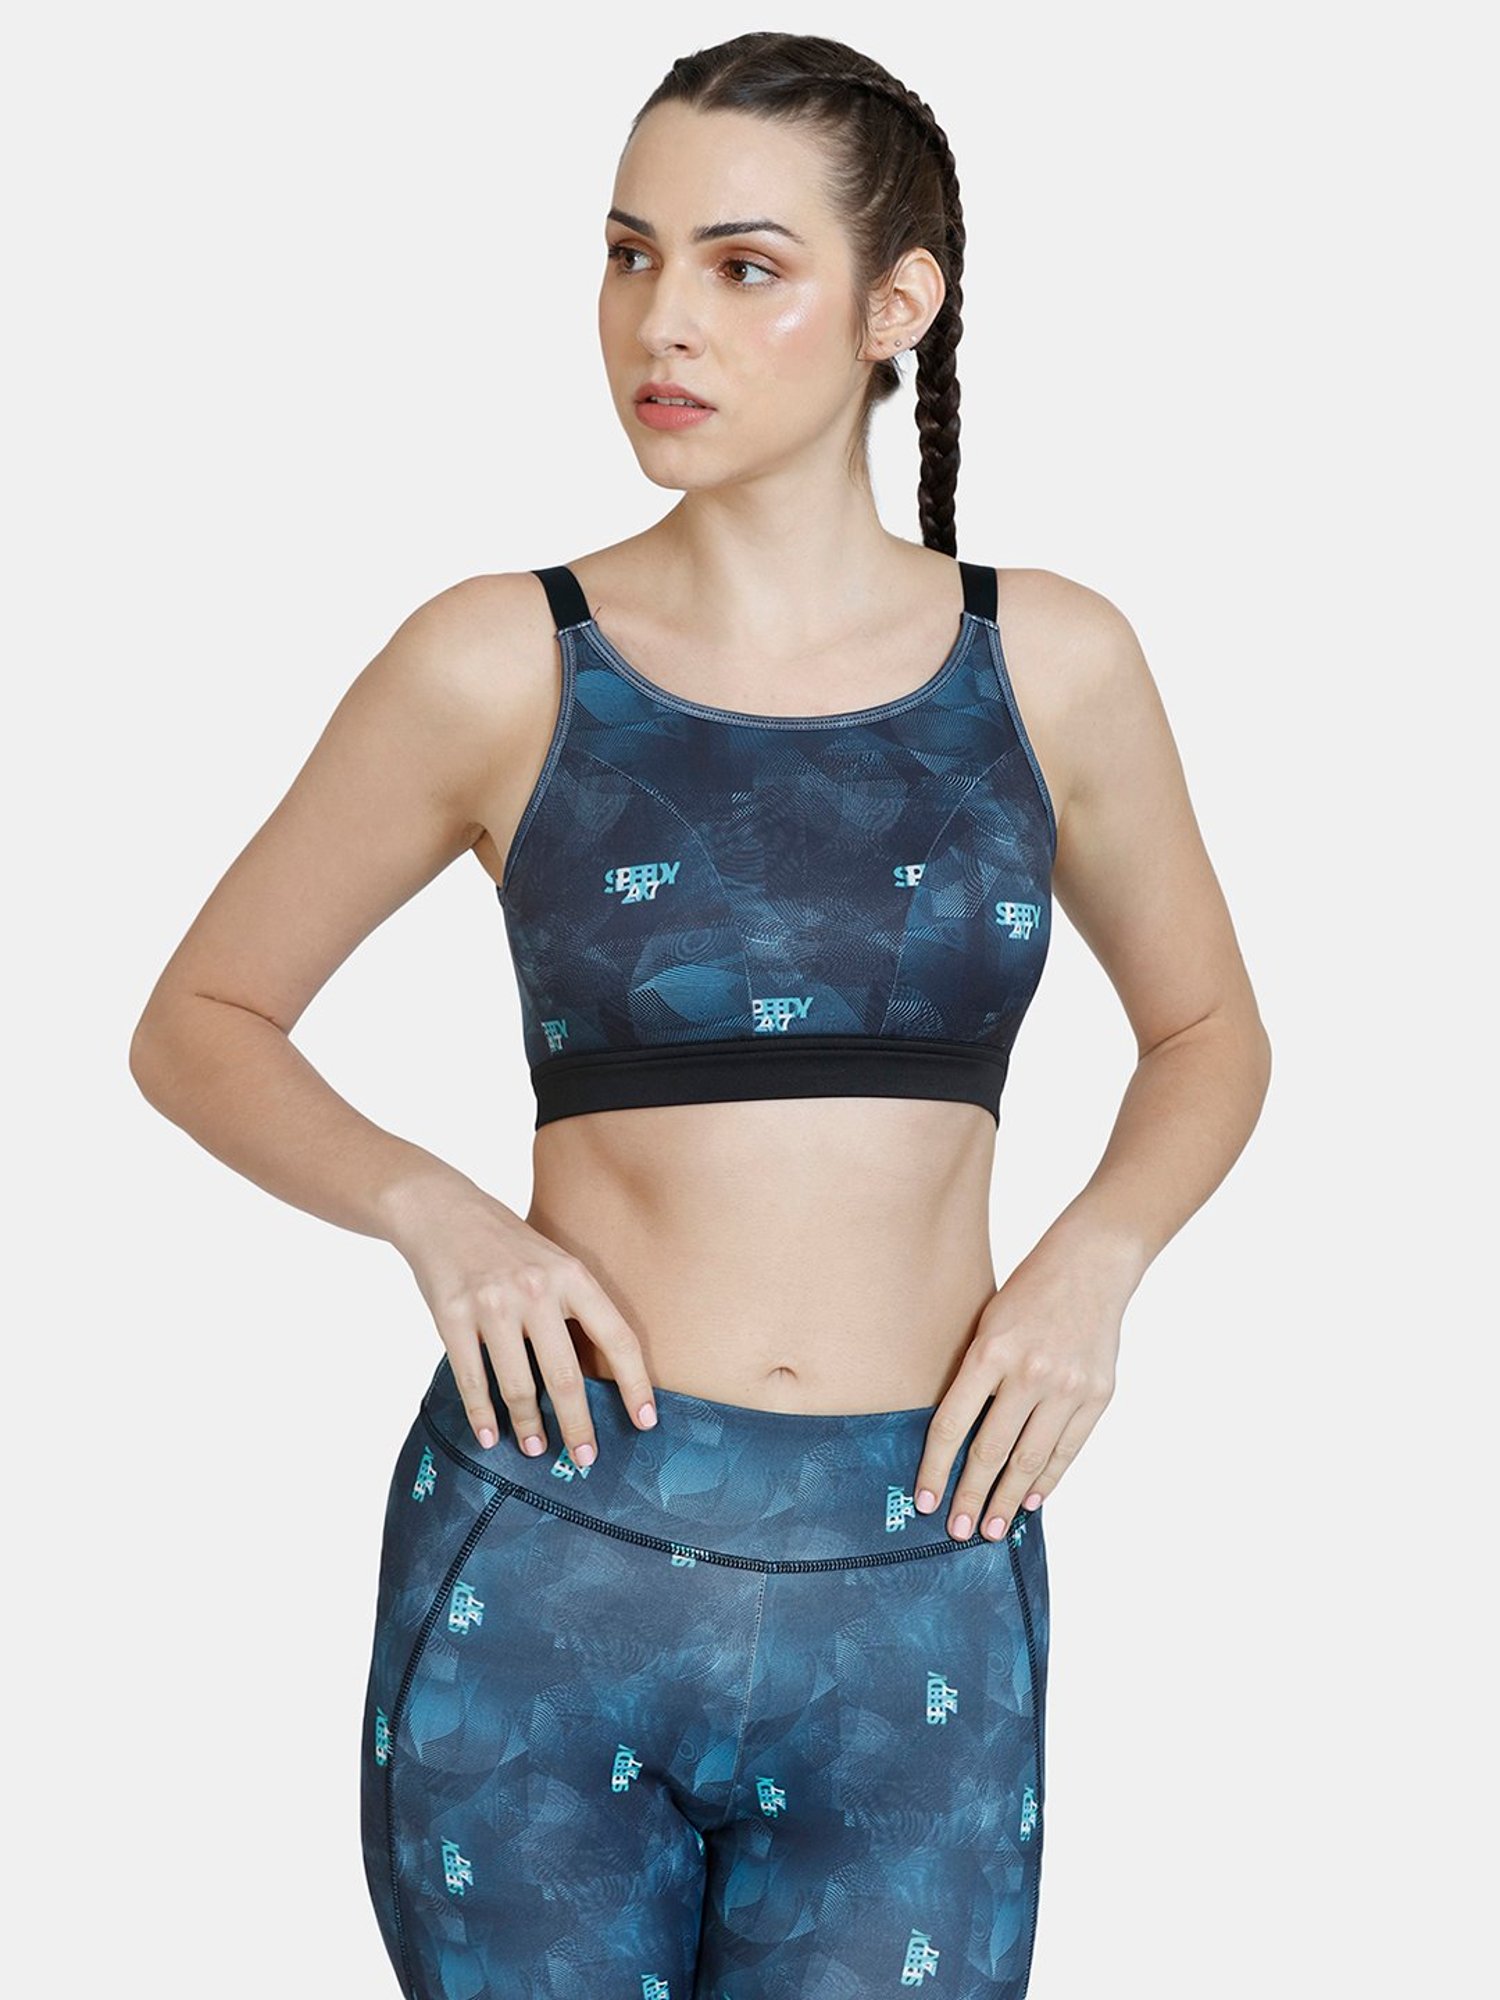 Zelocity Padded Sports Bra With Removable Padding - Blue N Print